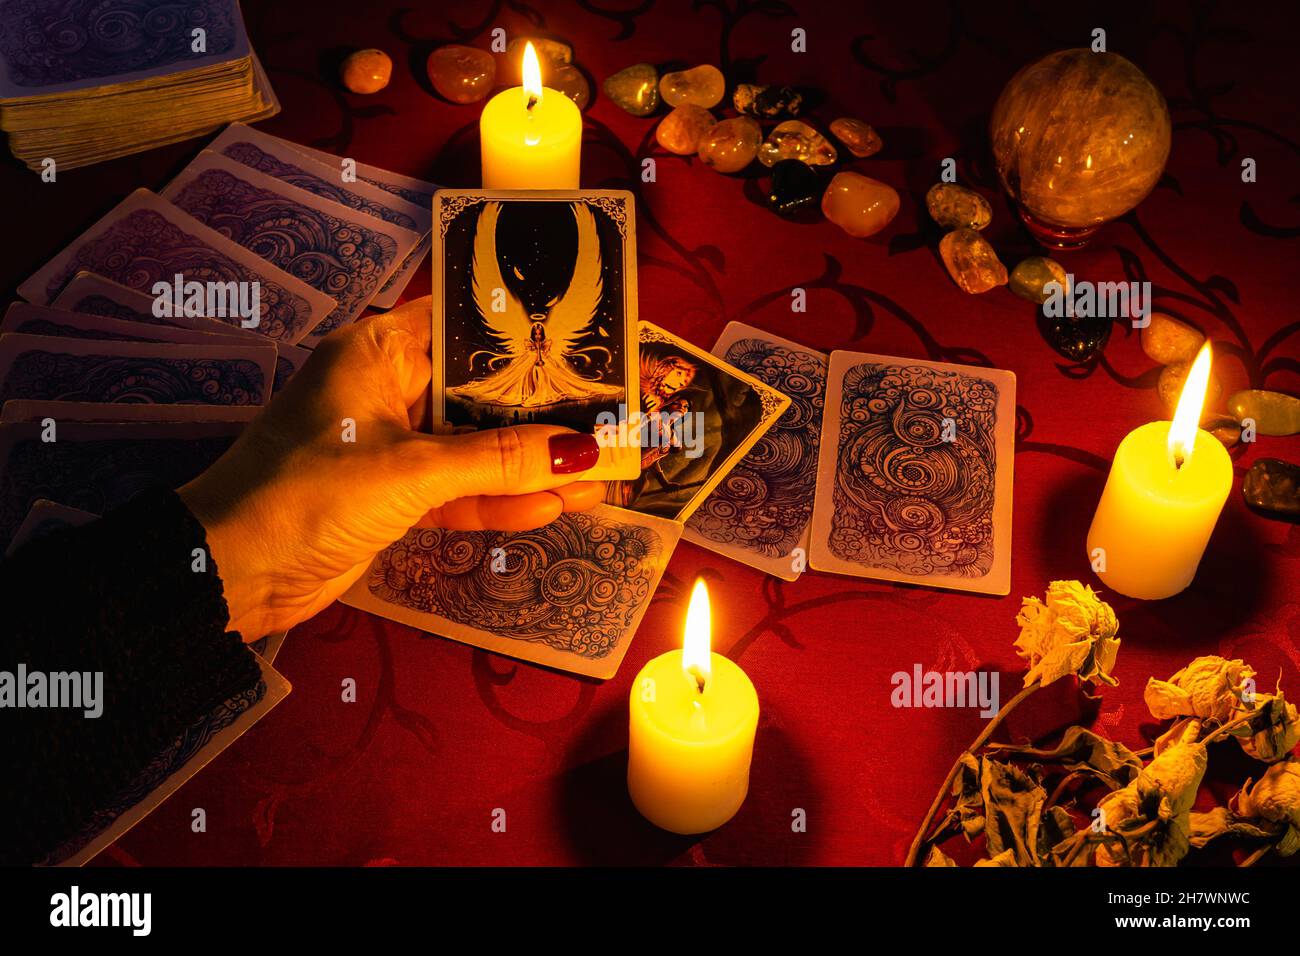 MINSK, BELARUS - November 2021: A fortune teller reads tarot cards and holds a justice card in her hand. Magic and occultism. Stock Photo